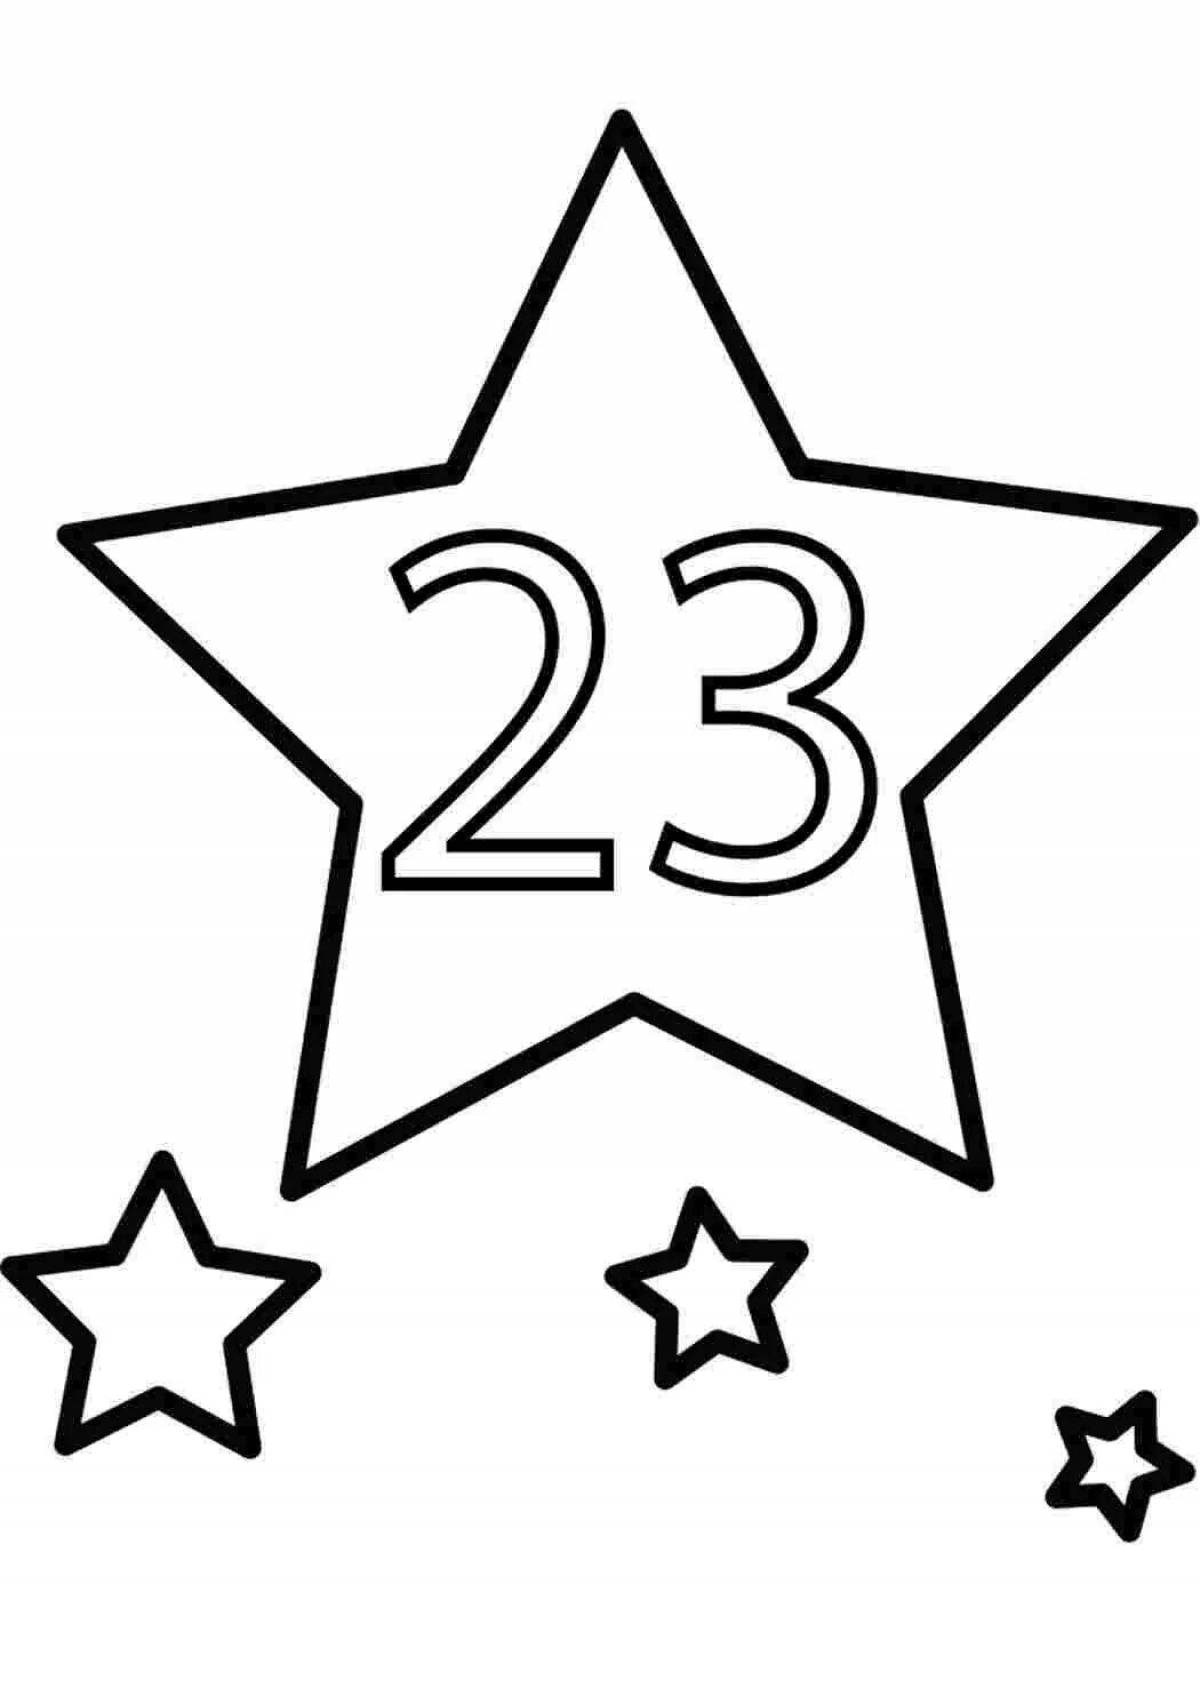 Coloring page emblem dazzling February 23